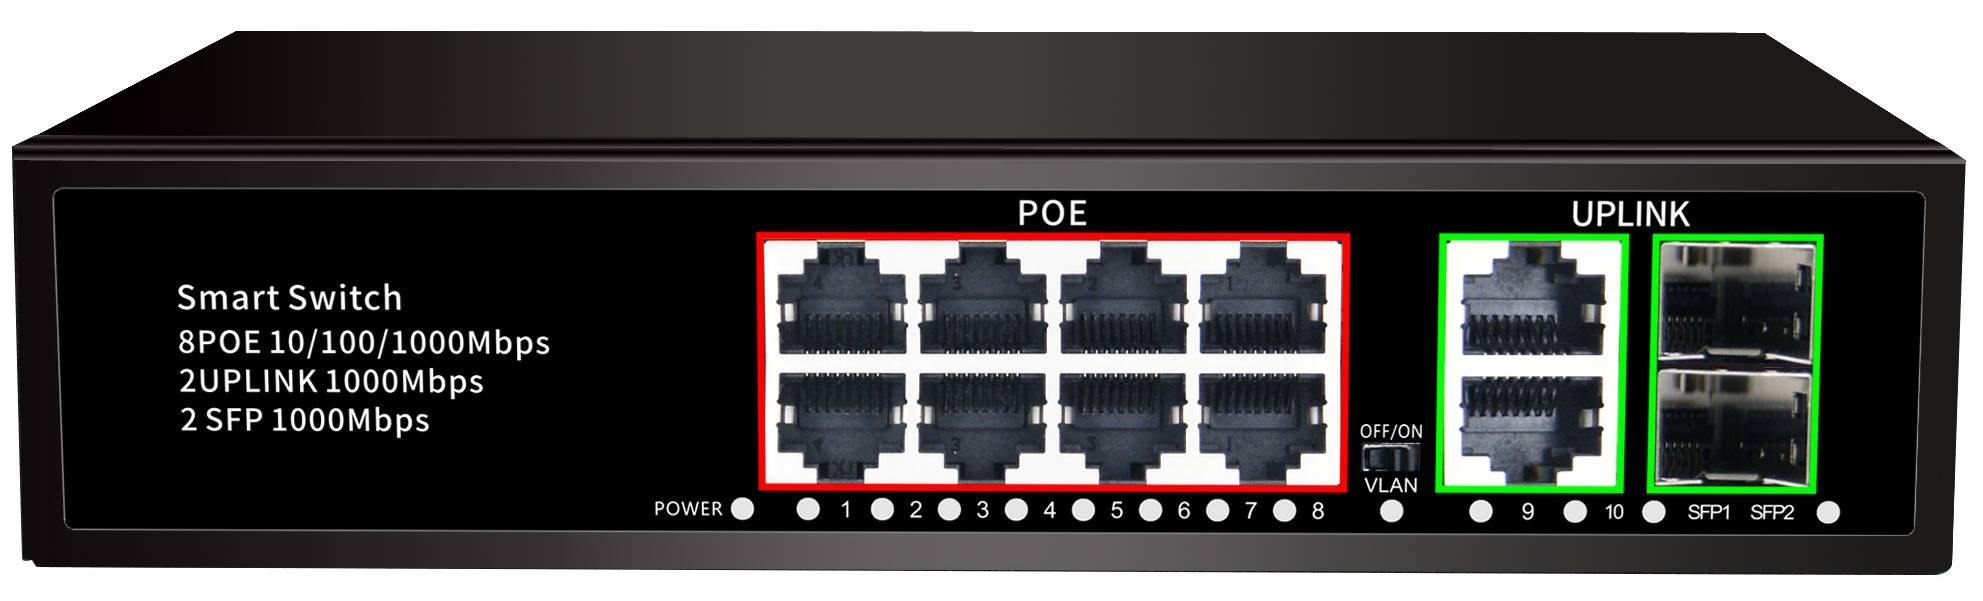 China Wholesale Ethernet Poe Switch Suppliers Factories - 8*100/1000mbps POE Port+2*100/1000mbps UP Link Port+1*100/1000mbps SFP Port, Smart PoE Switch JHA-P42208BMH – JHA